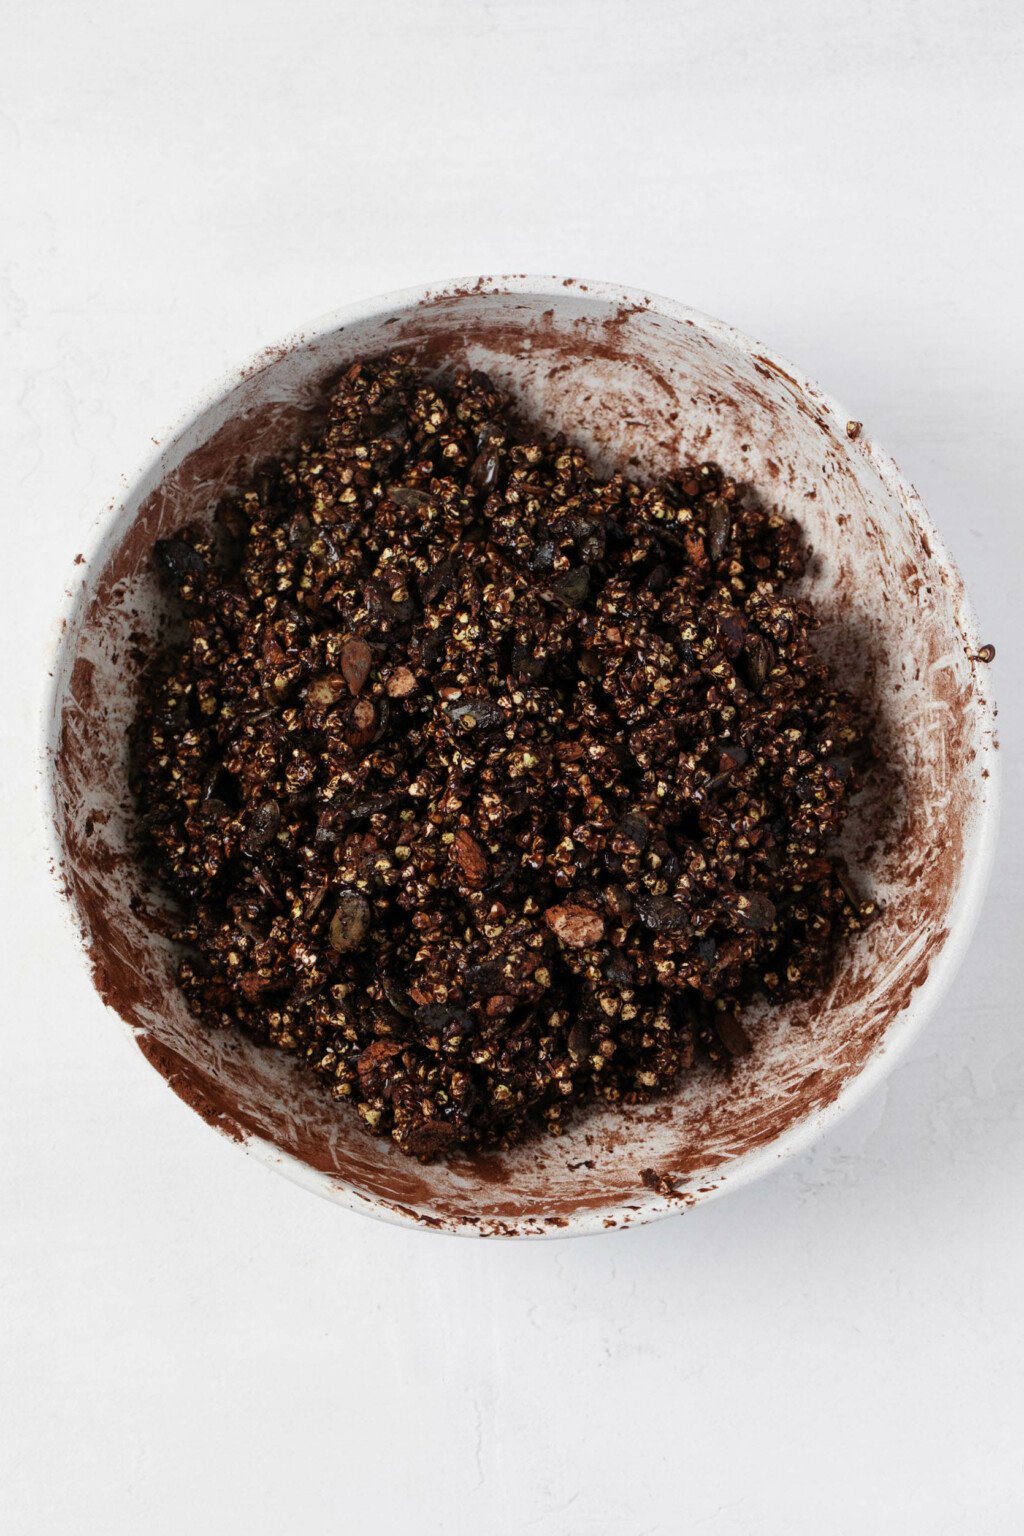 An overhead image of a large mixing bowl, which is being used to hold cocoa-flavored buckwheat granola.